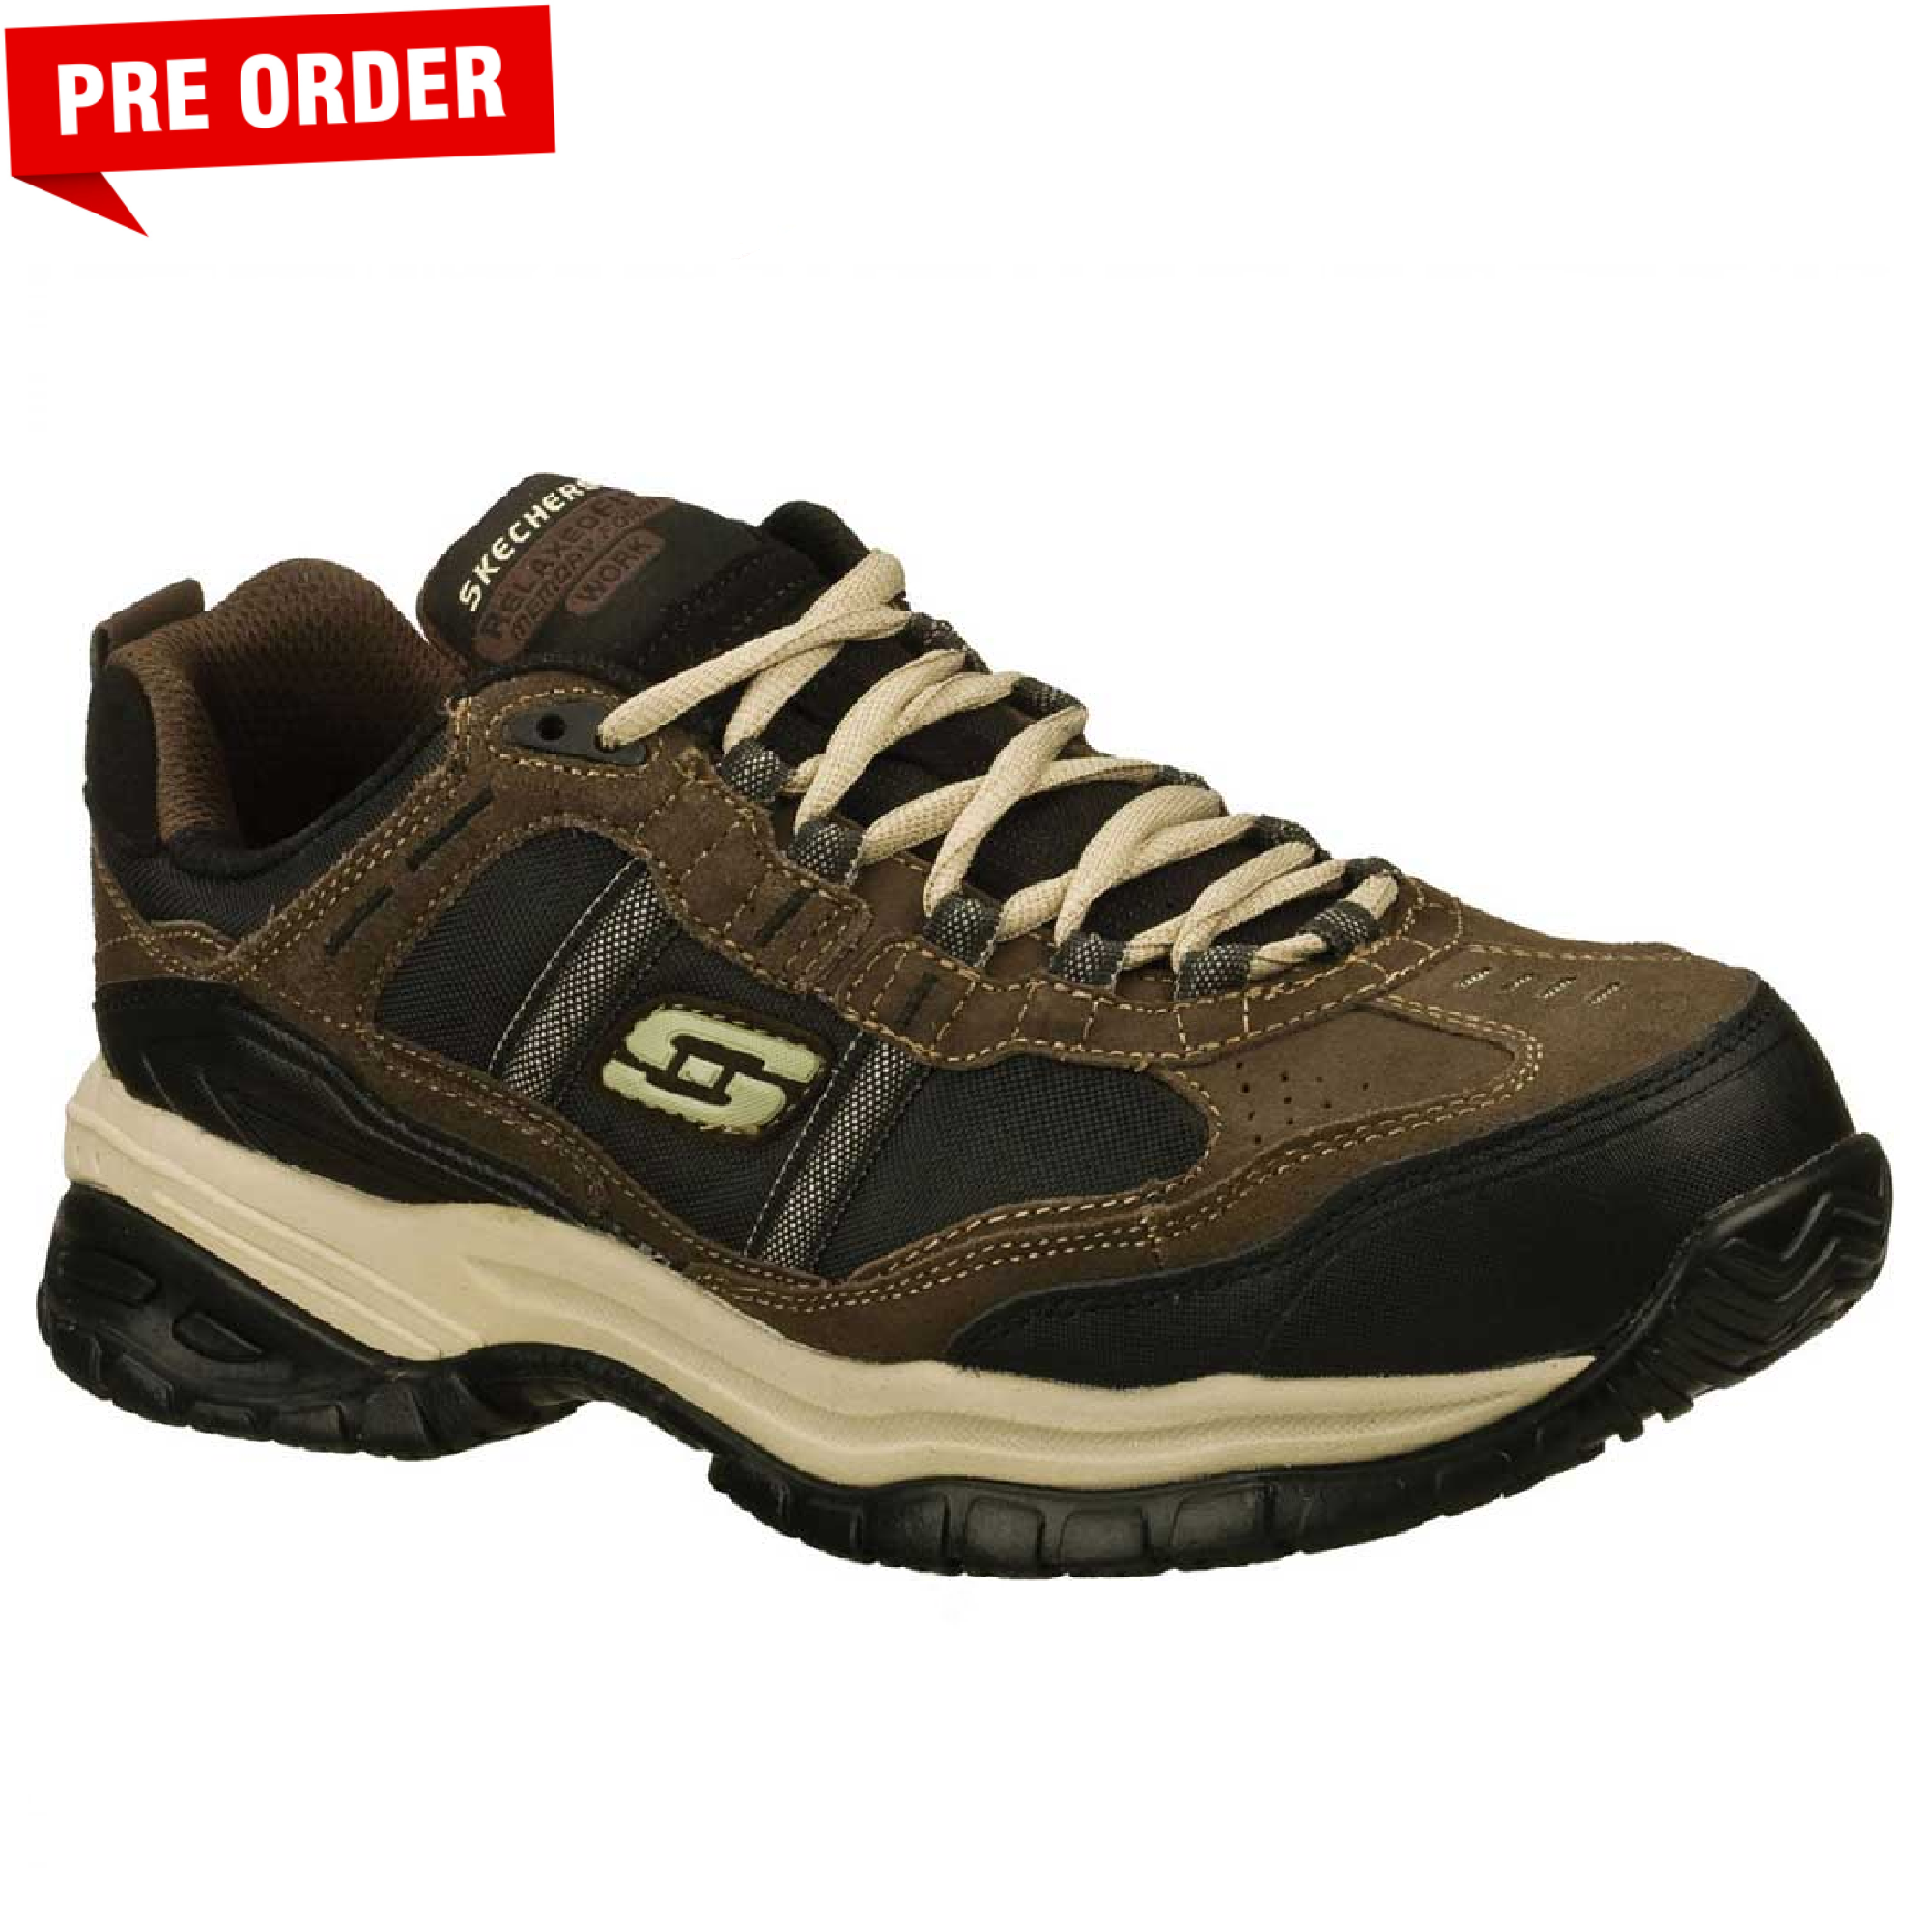 Skechers Work 77013BRBK Relaxed Fit Soft Stride-Grinnell Composite Toe Safety Shoe